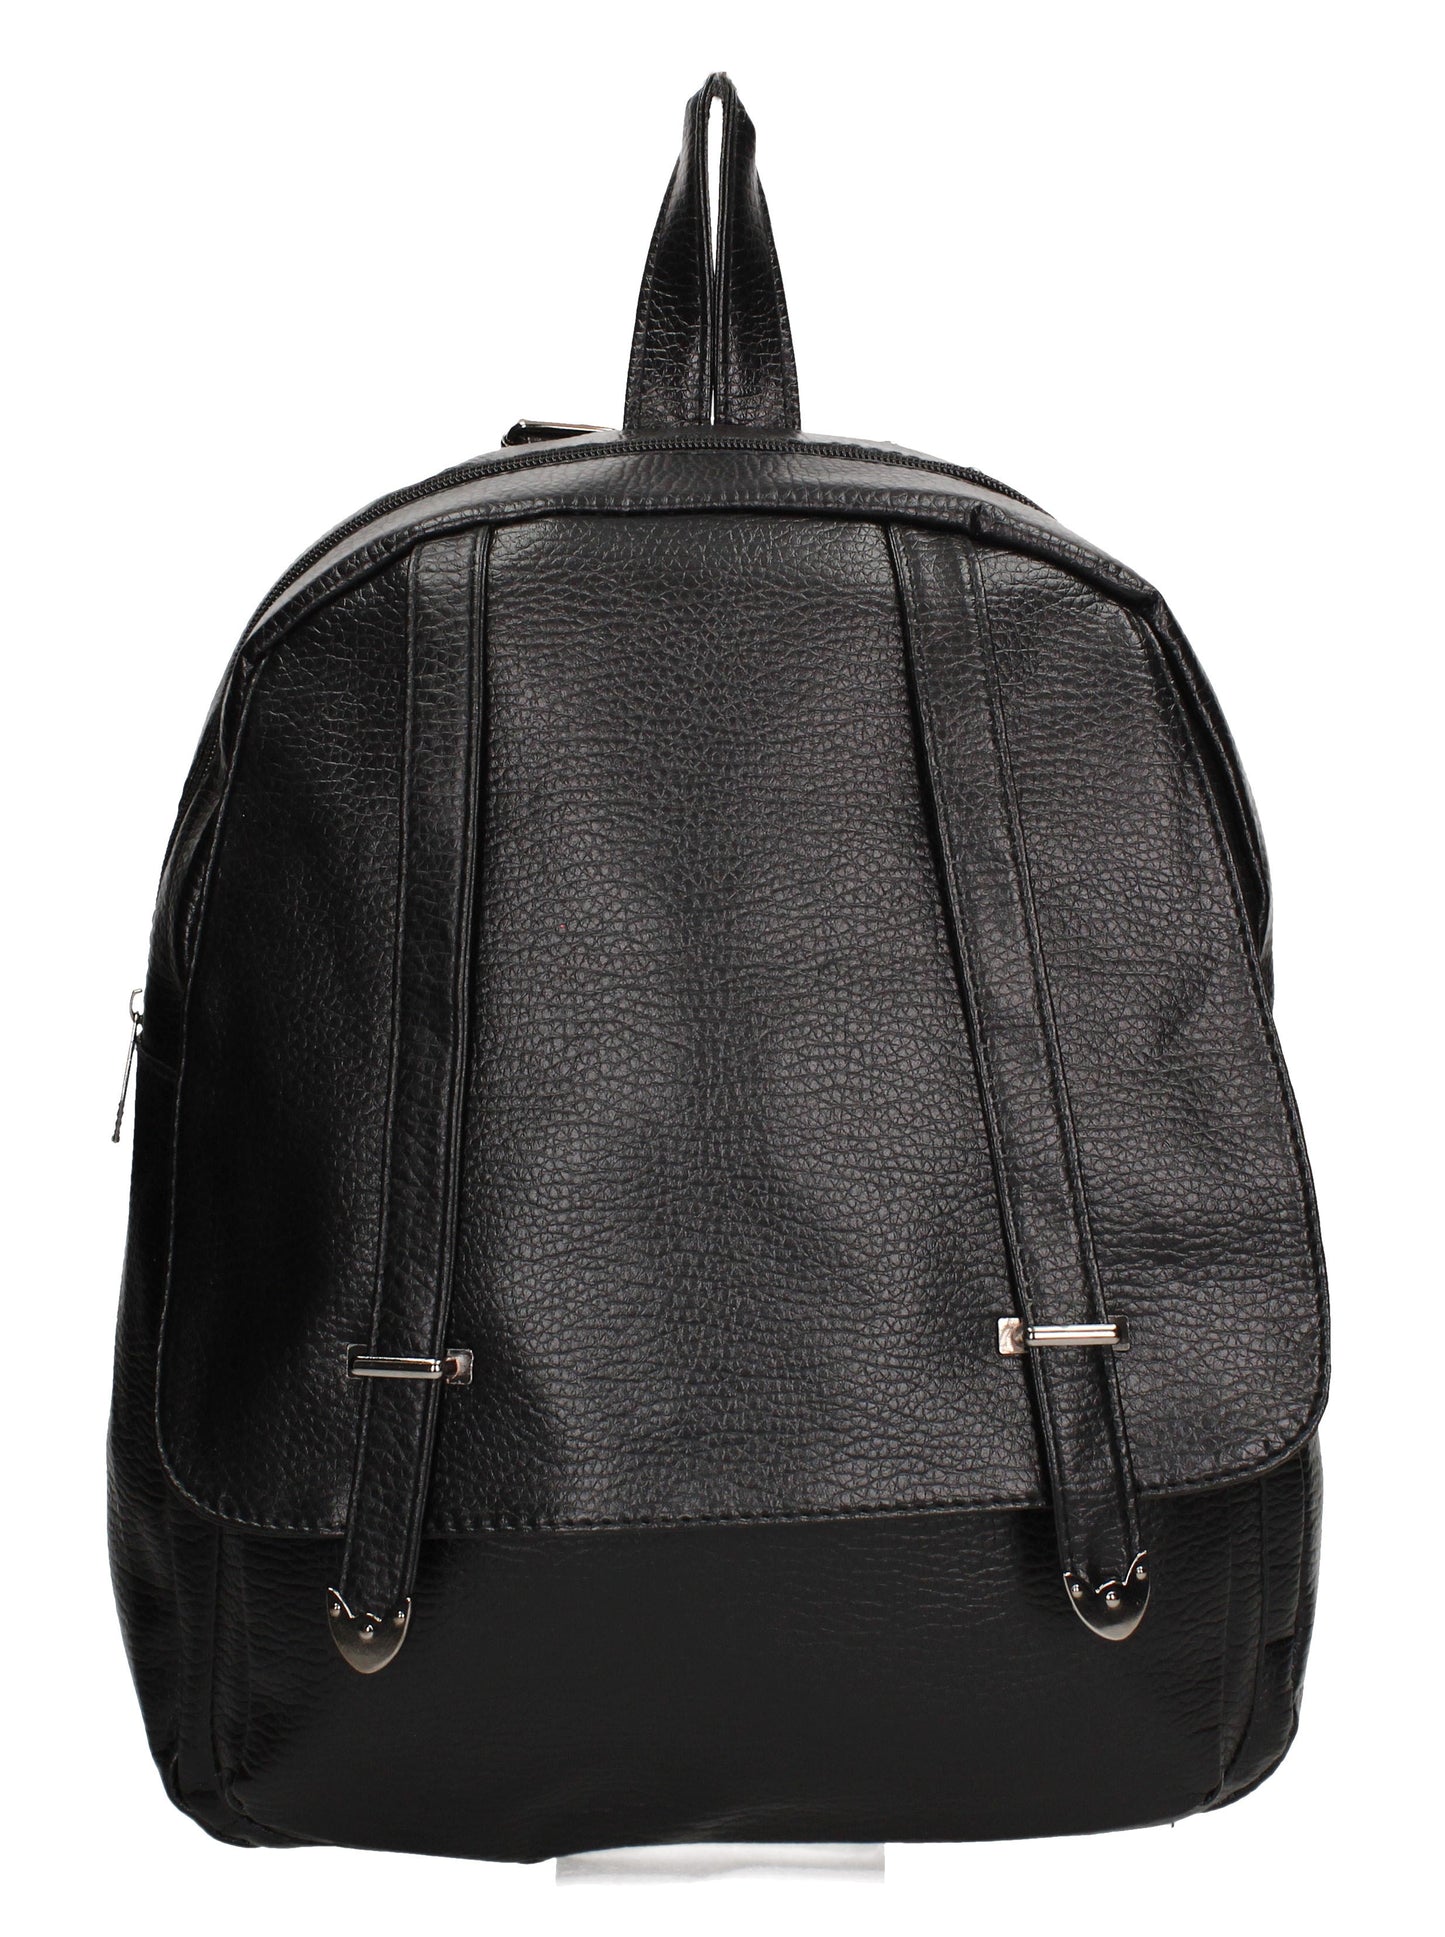 Swanky Swans Tiffany Backpack Black Perfect Backpack for school!